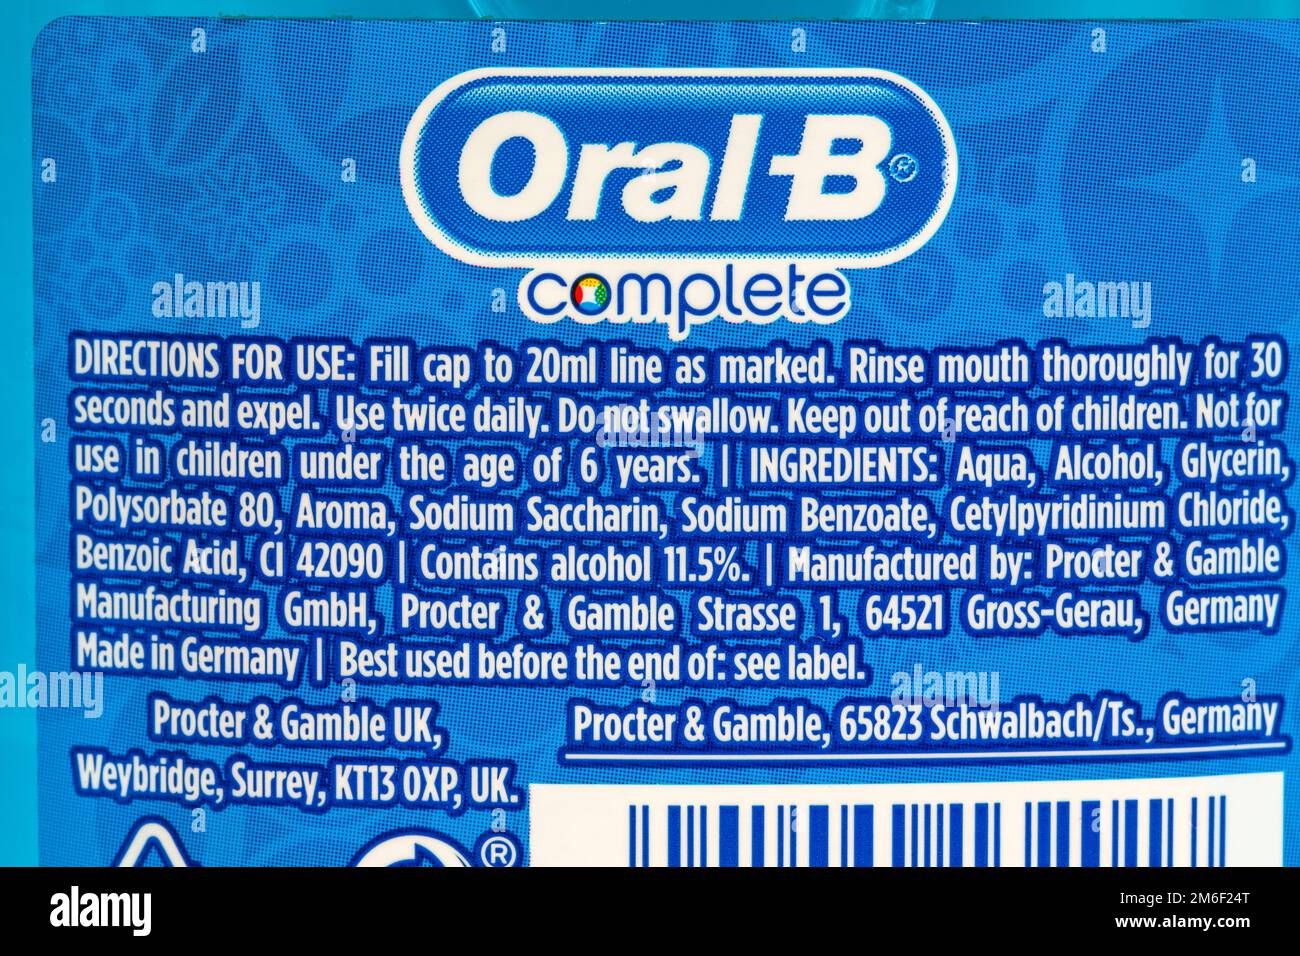 Directions for use and Ingredients on Oral-B complete mouthwash -Oral-B complete Lasting Freshness helps protect against plaque arctic mint mouthwash Stock Photo